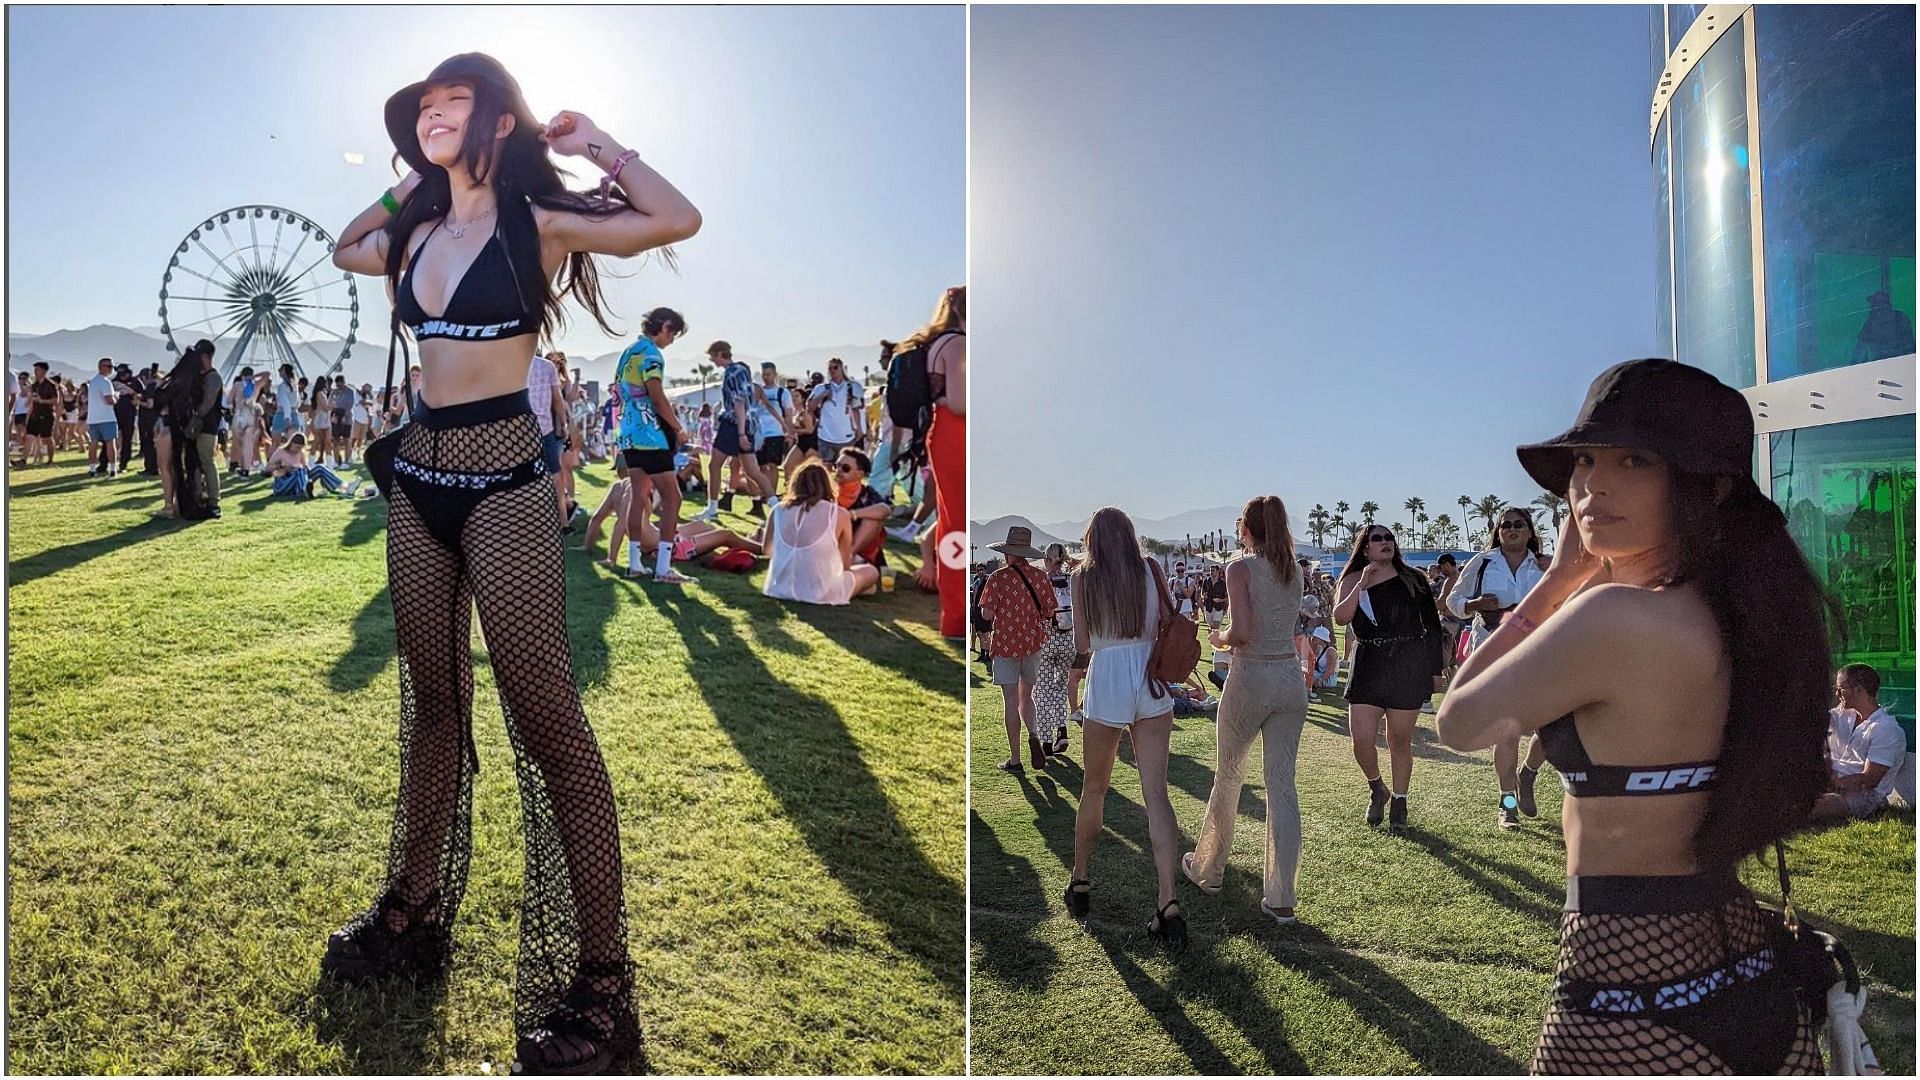 Valkyrae broke the internet with her stunning Coachella 2022 outfit (Image ...